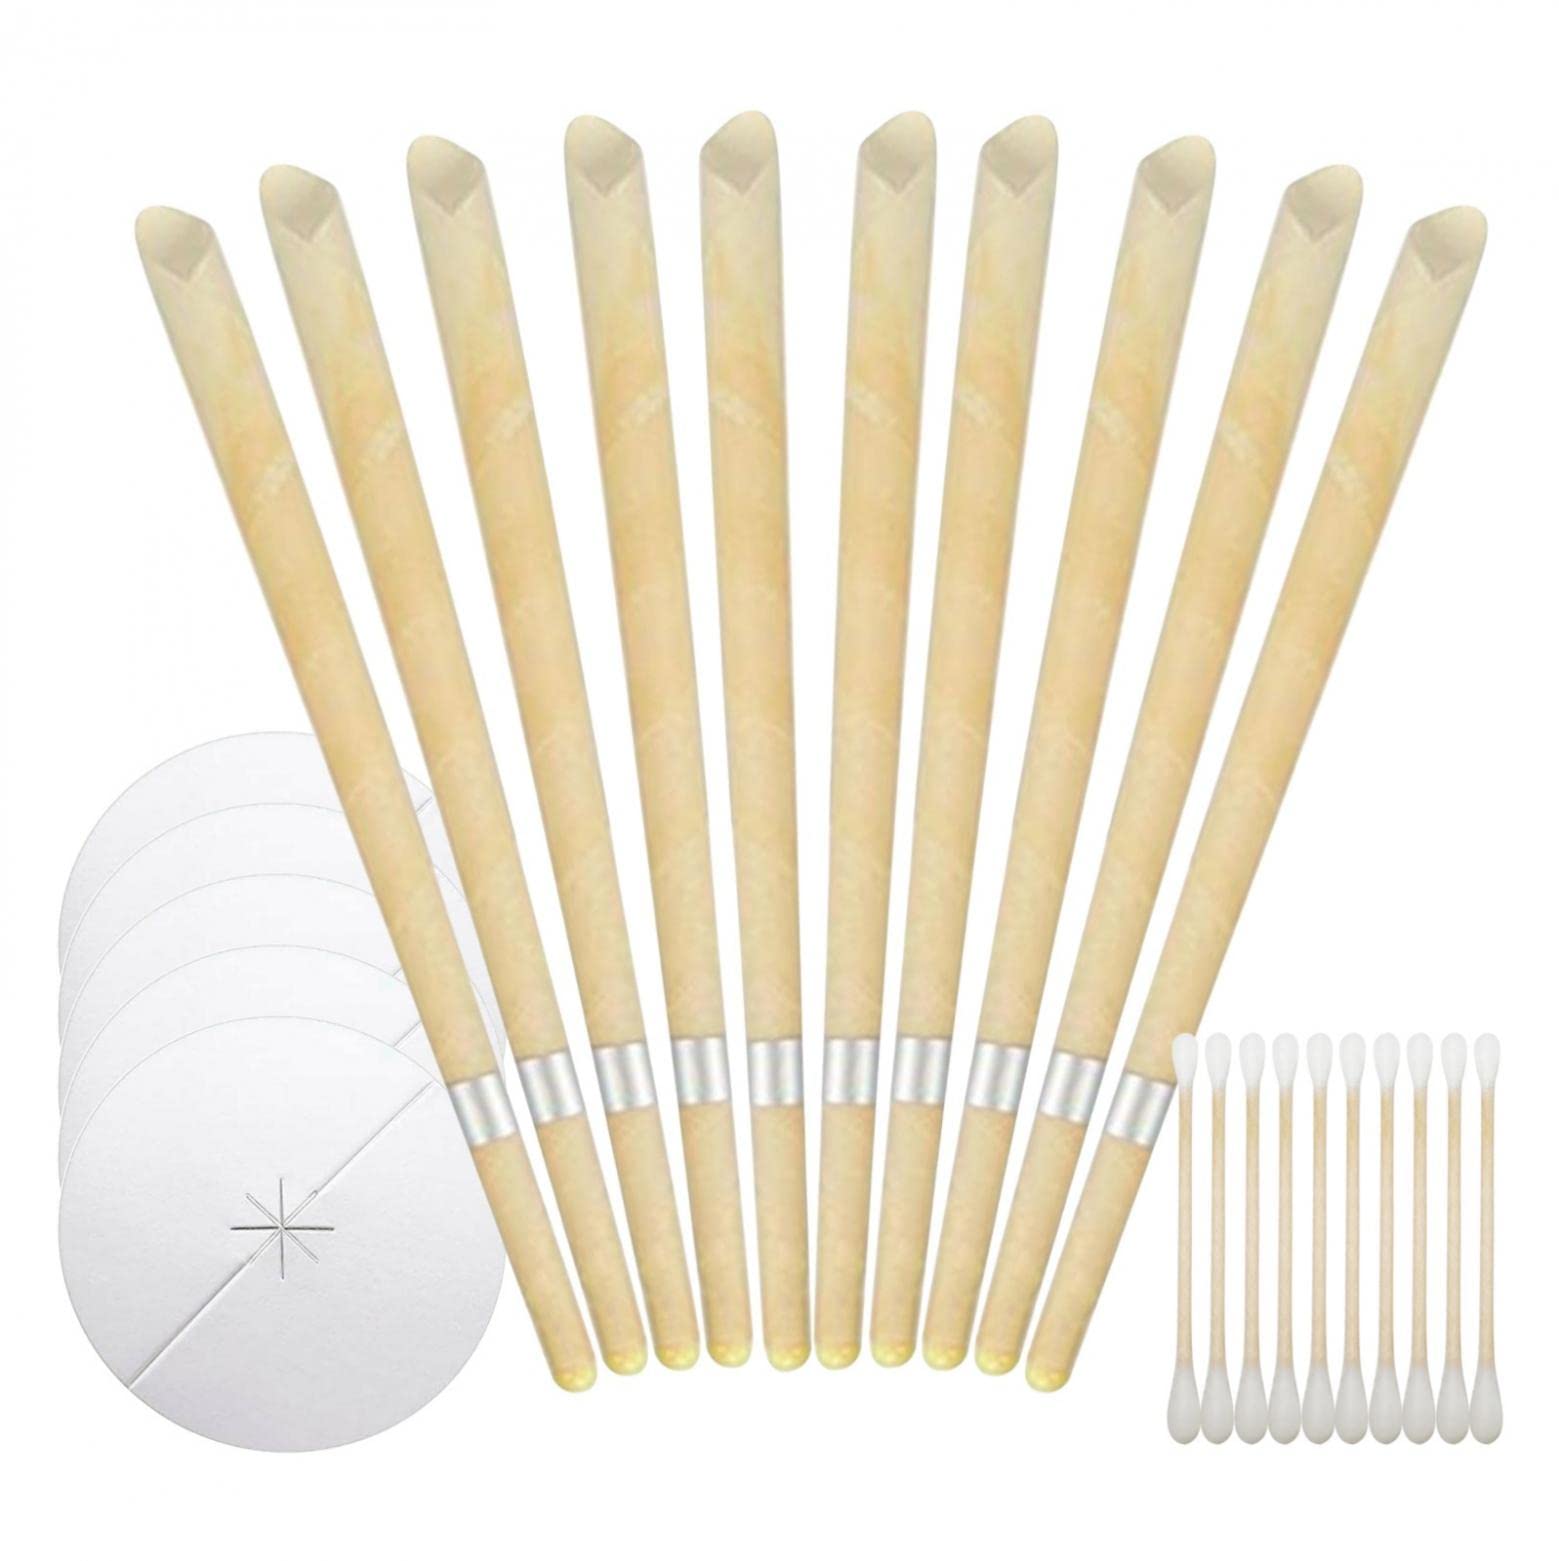 Beeswax Ear Wax Removal Candles Set of 10, Ear Candles Wax Removal Ear Wax Removal Candles for Ear Cleaning Ear Candles Wax Removal Ear Candles for Ear Candling Wax Removal Ear Wax Removal Kit